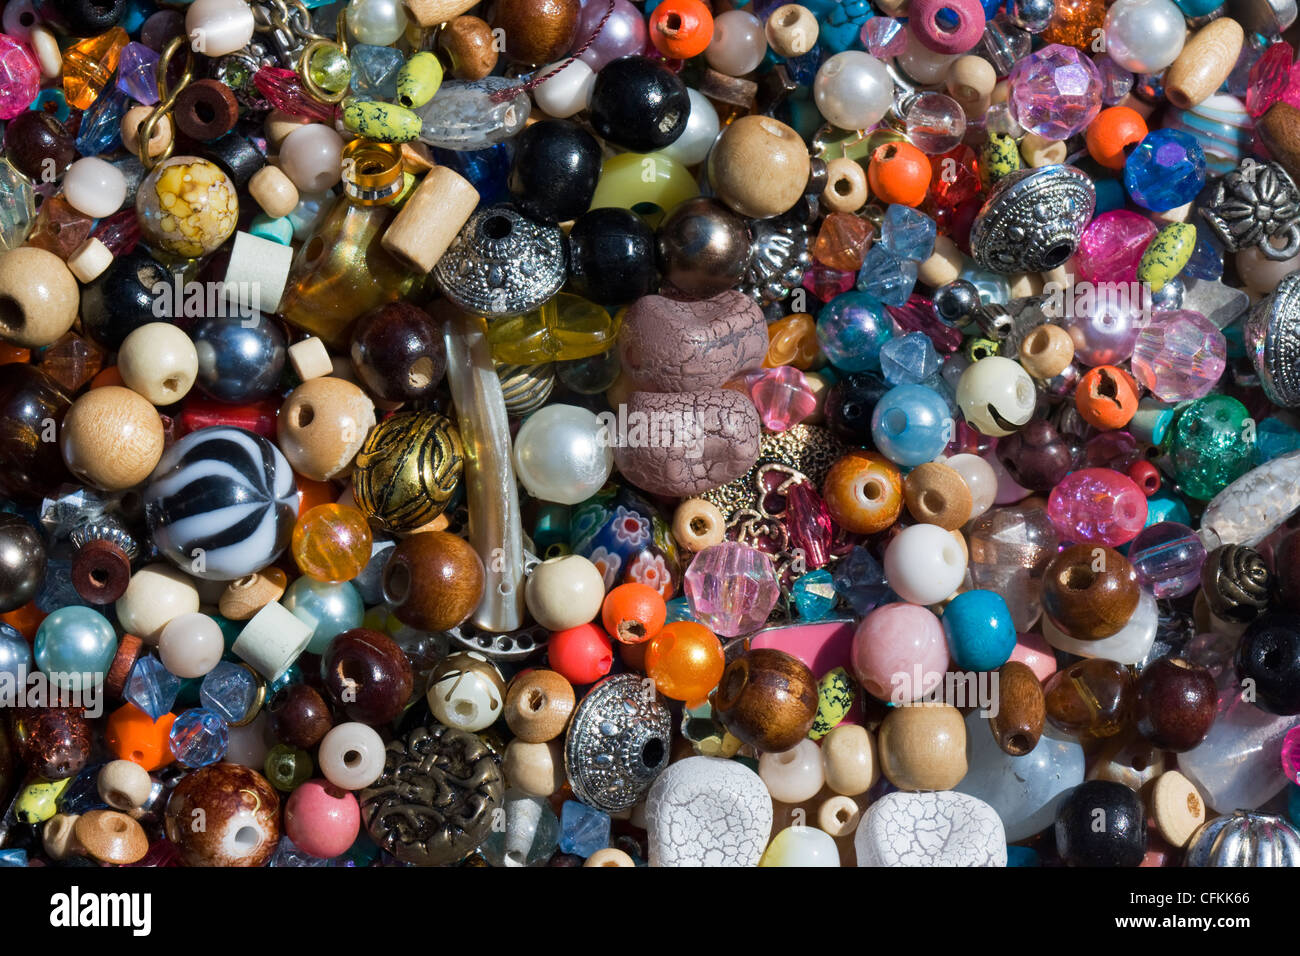 https://c8.alamy.com/comp/CFKK66/hundreds-of-beads-in-all-kinds-of-forms-and-colors-CFKK66.jpg